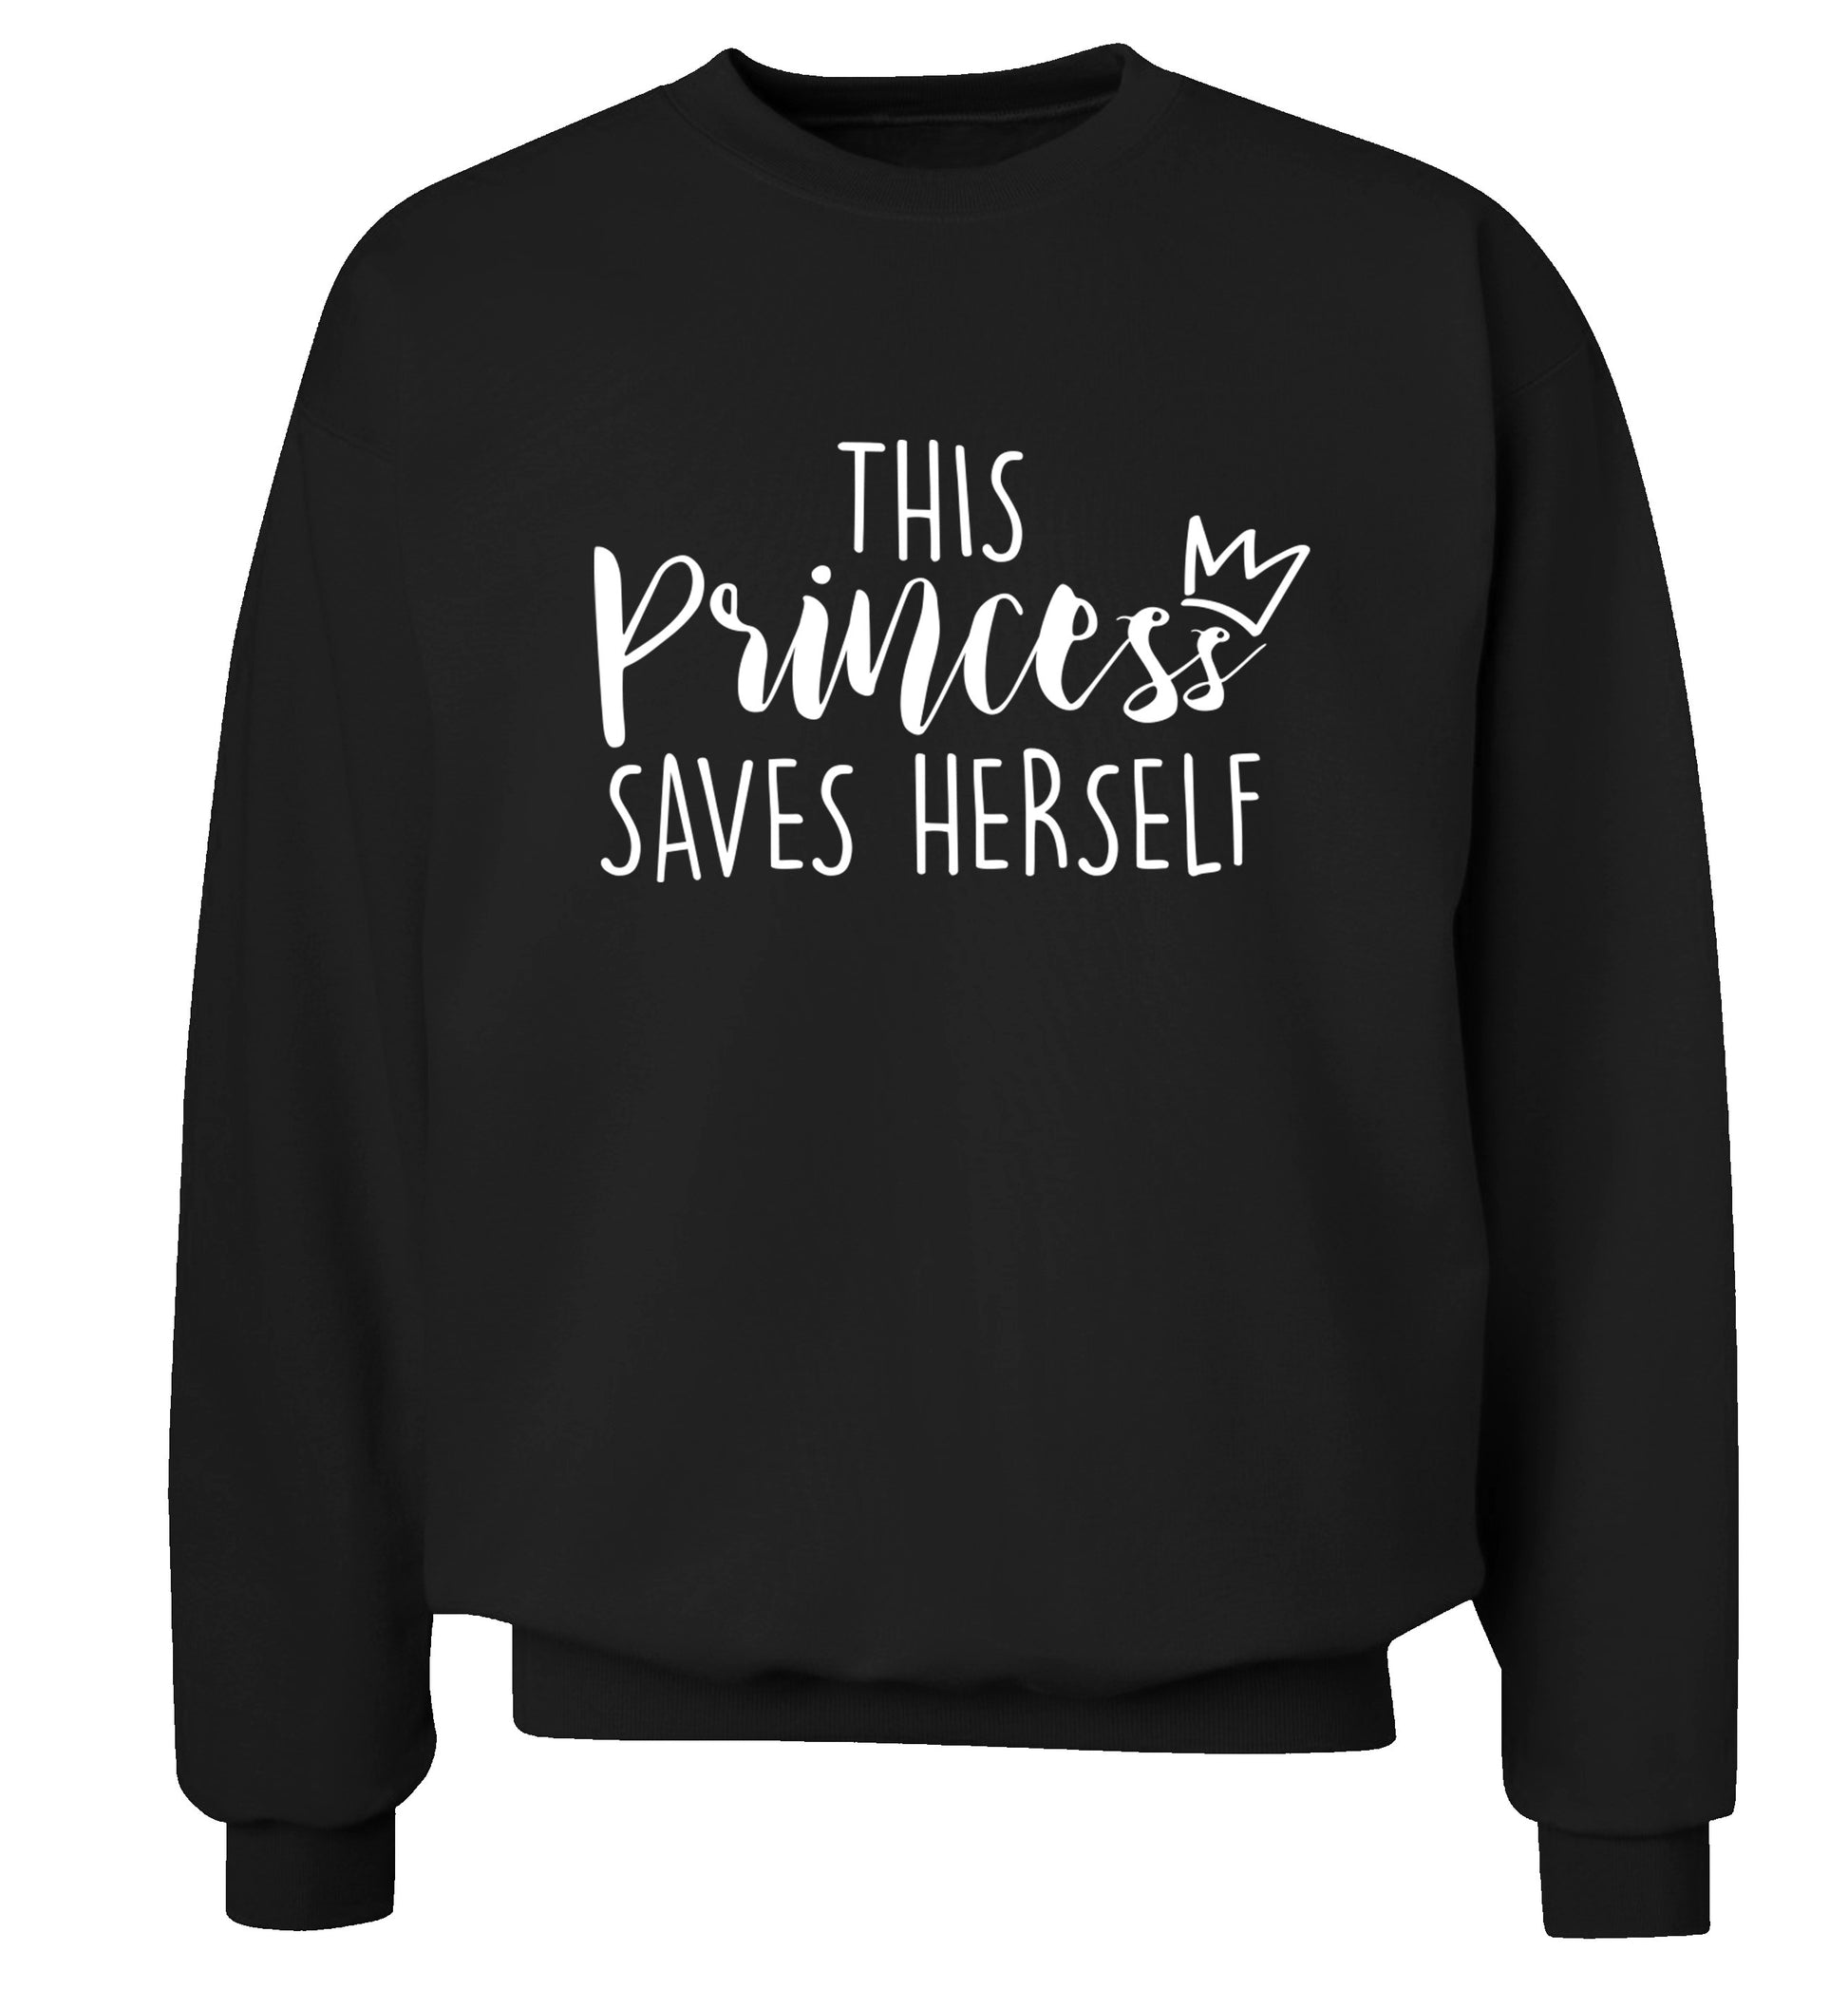 This princess saves herself Adult's unisex black Sweater 2XL